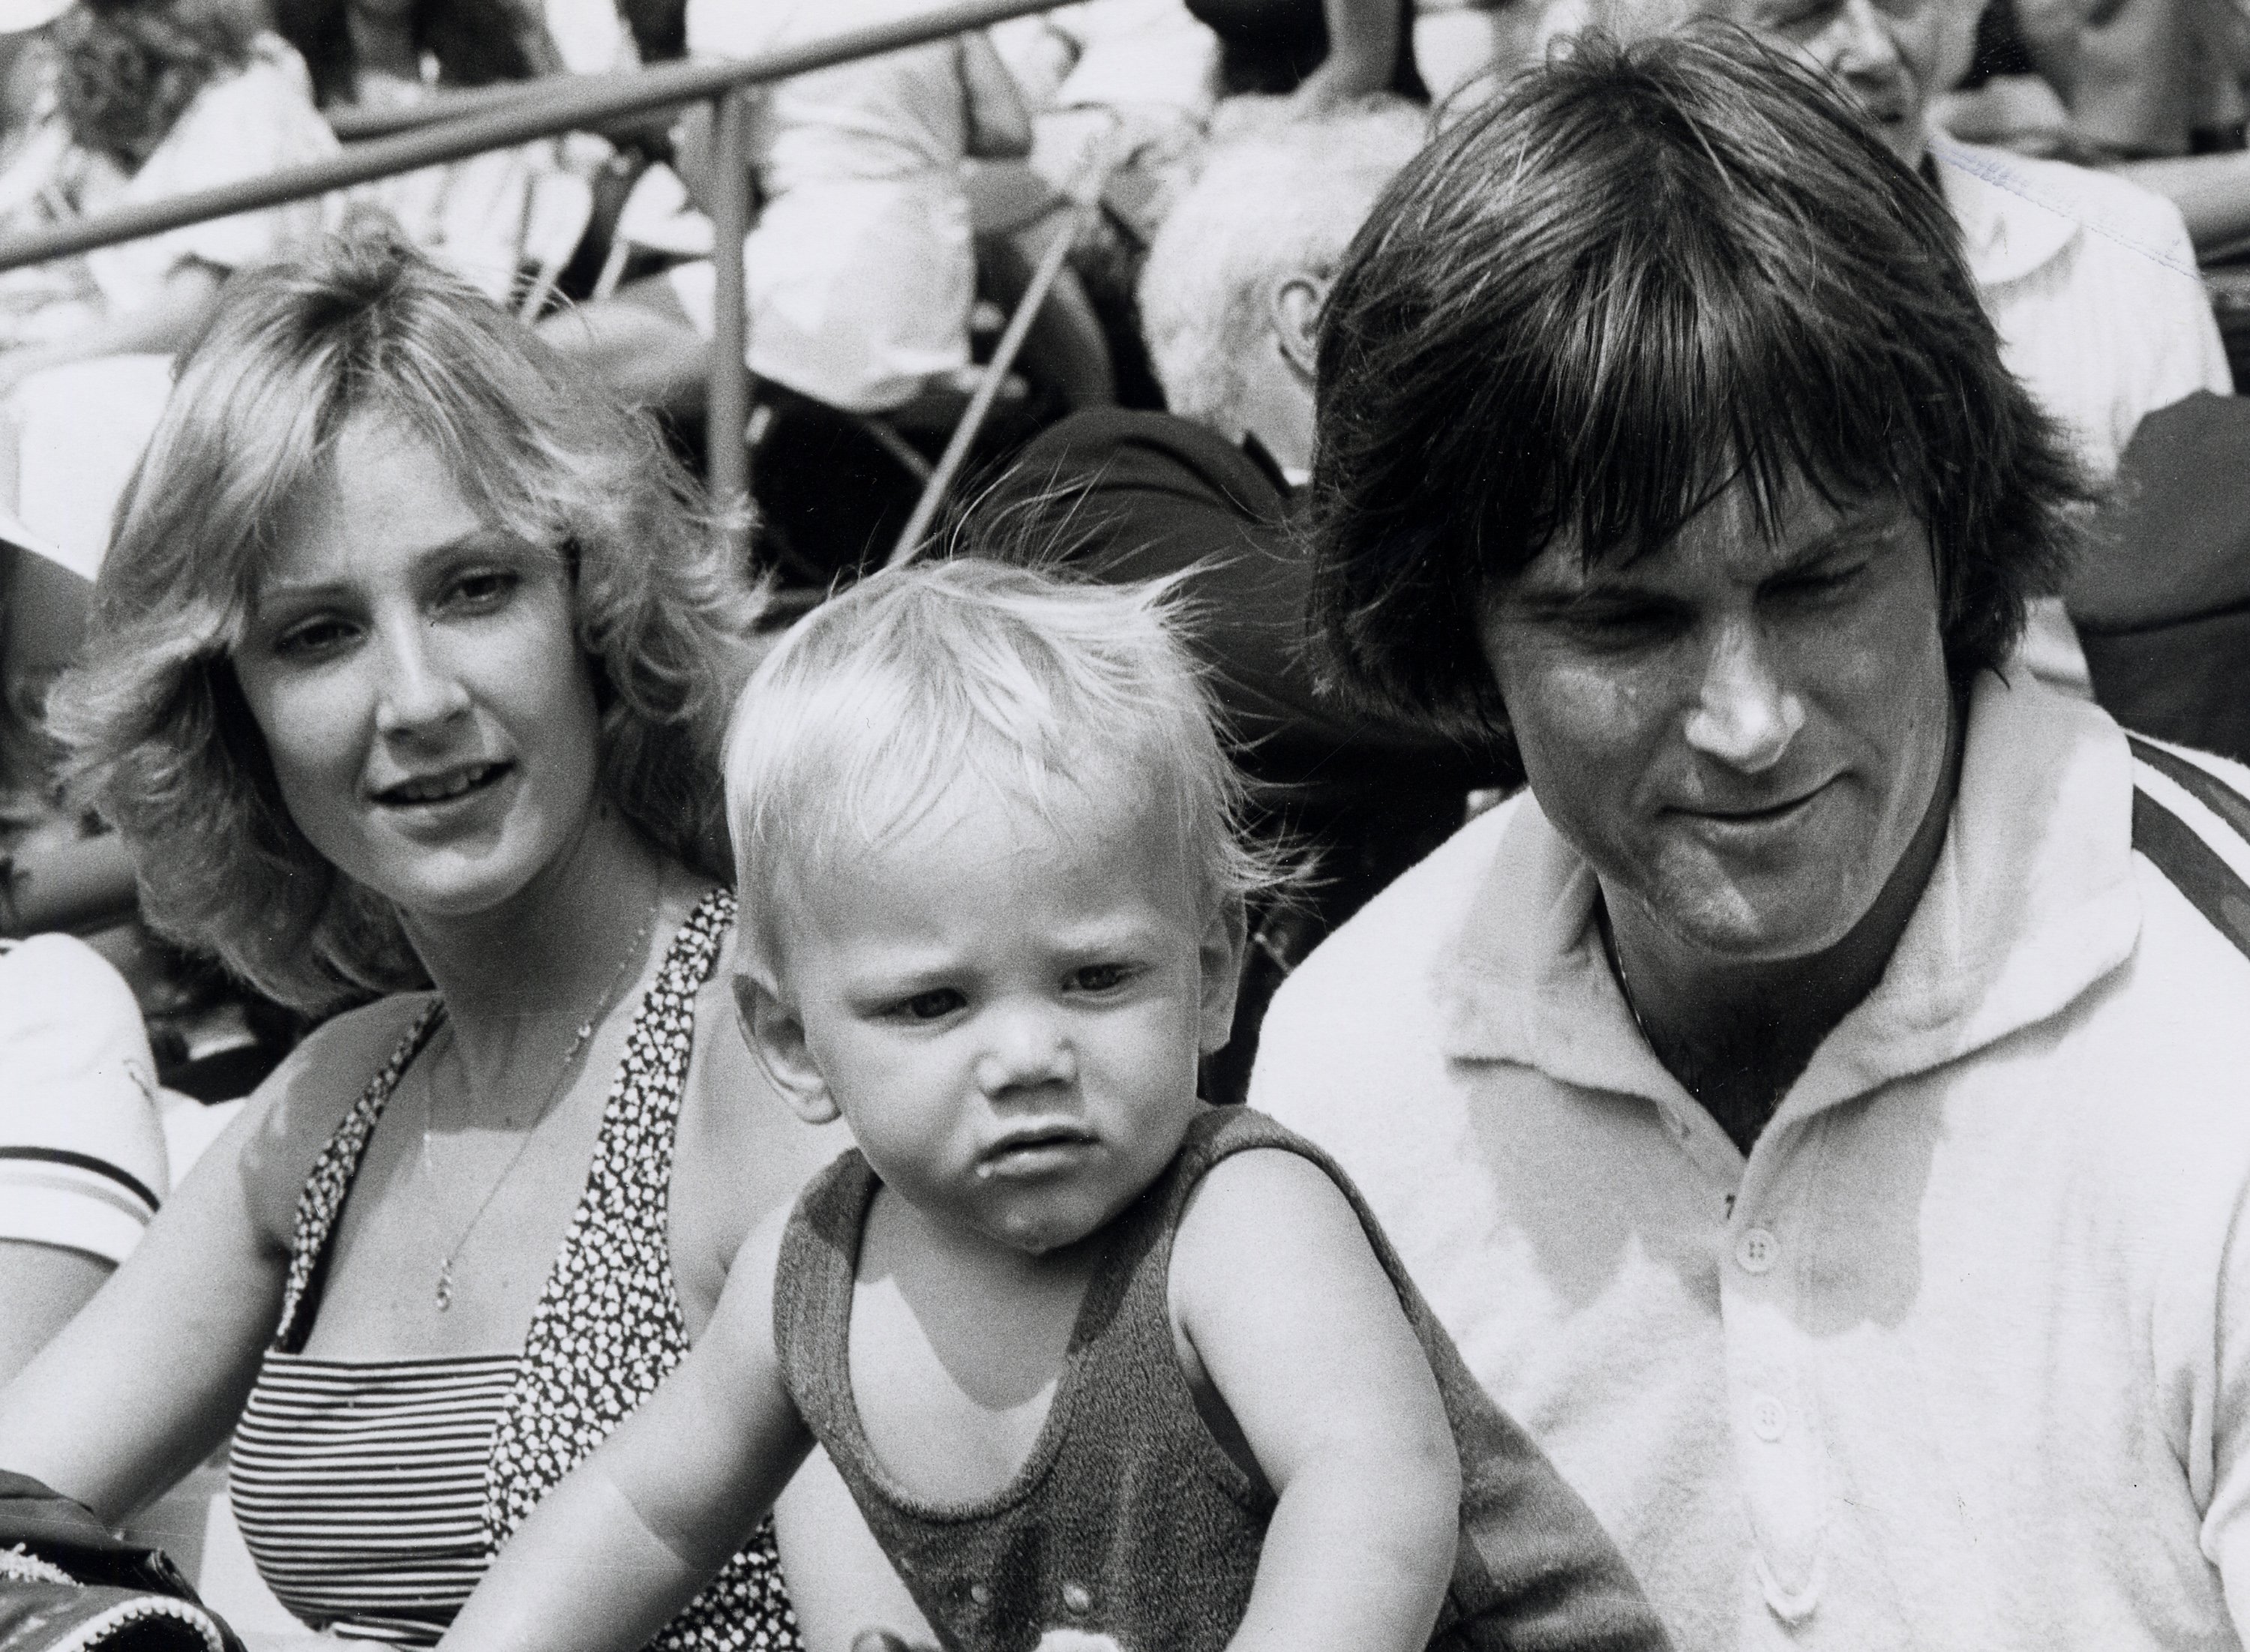 Chrystie Crownover, Burton Jenner, and Caitlyn Jenner at the 8th Annual RFK Pro Celebrity Tennis Tournament on August 25, 1979 | Source: Getty Images